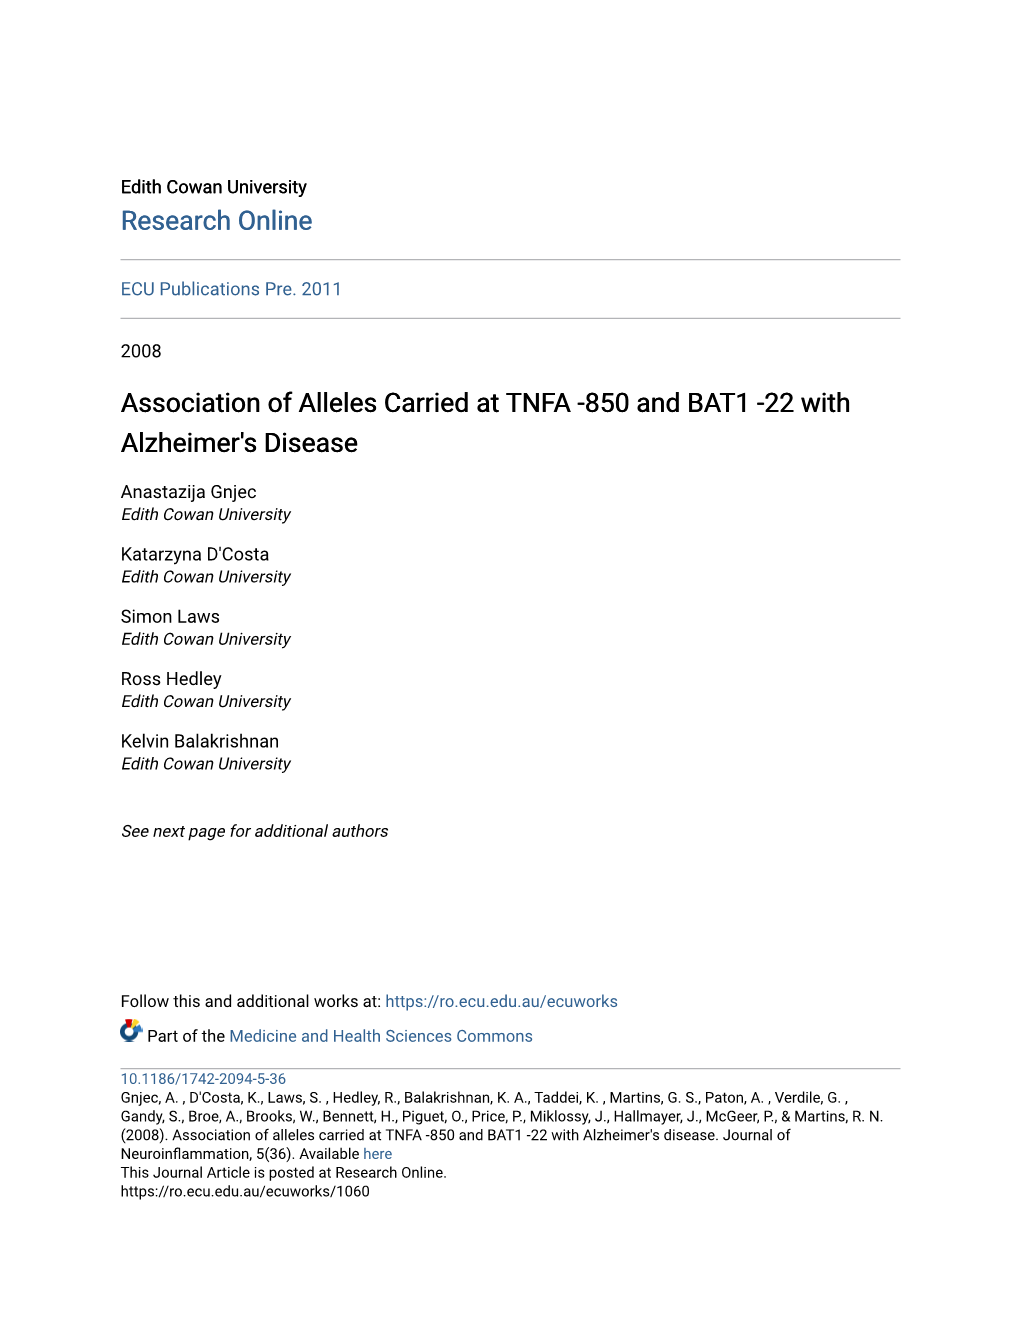 Association of Alleles Carried at TNFA -850 and BAT1 -22 with Alzheimer's Disease